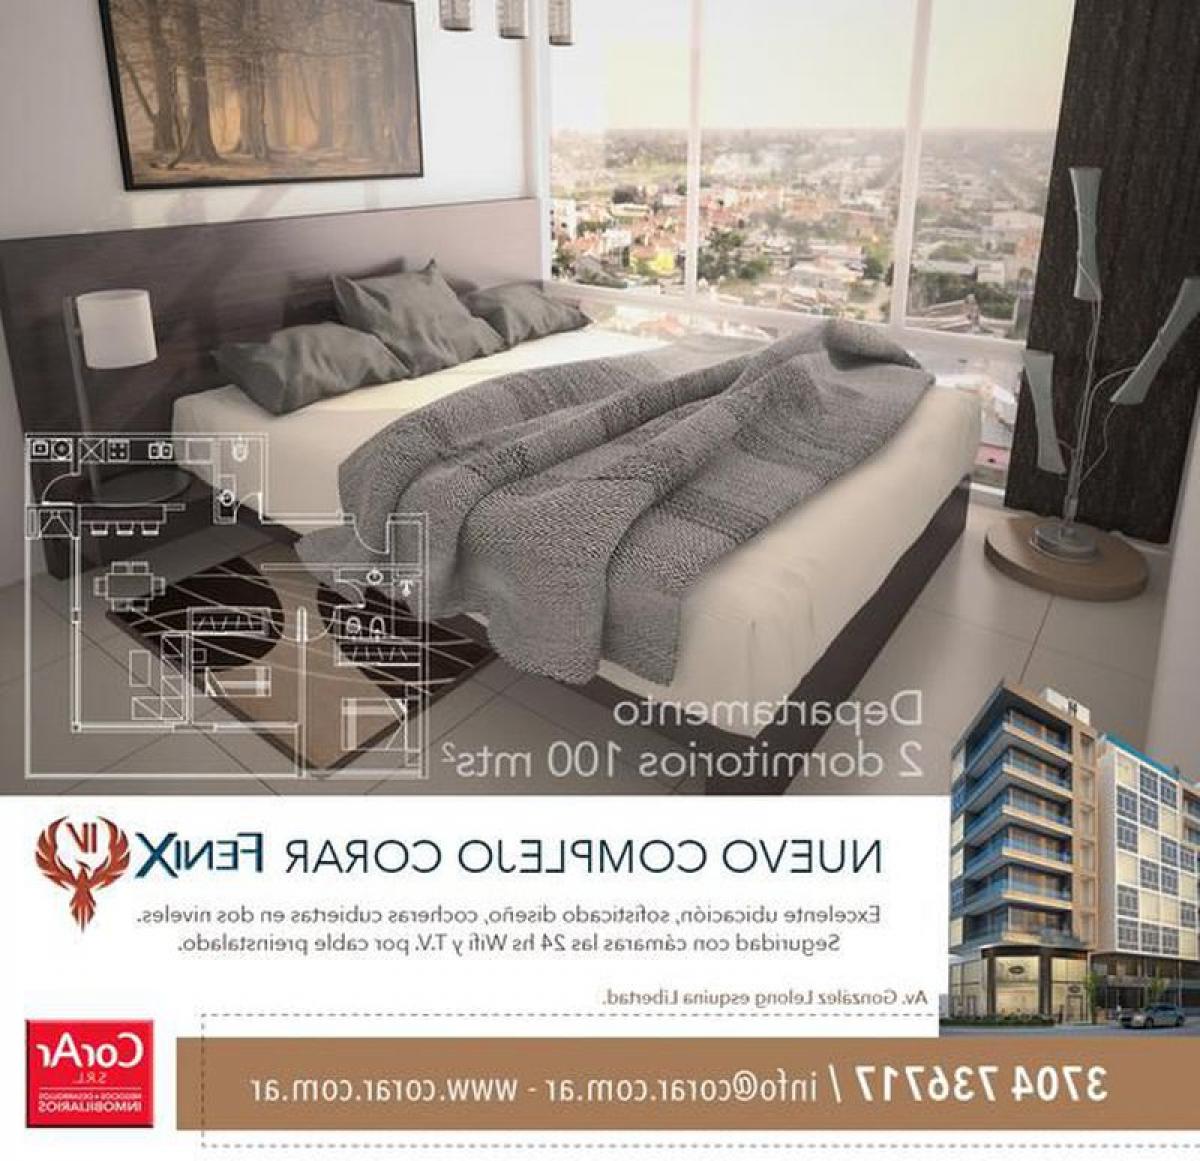 Picture of Apartment For Sale in Formosa, Formosa, Argentina